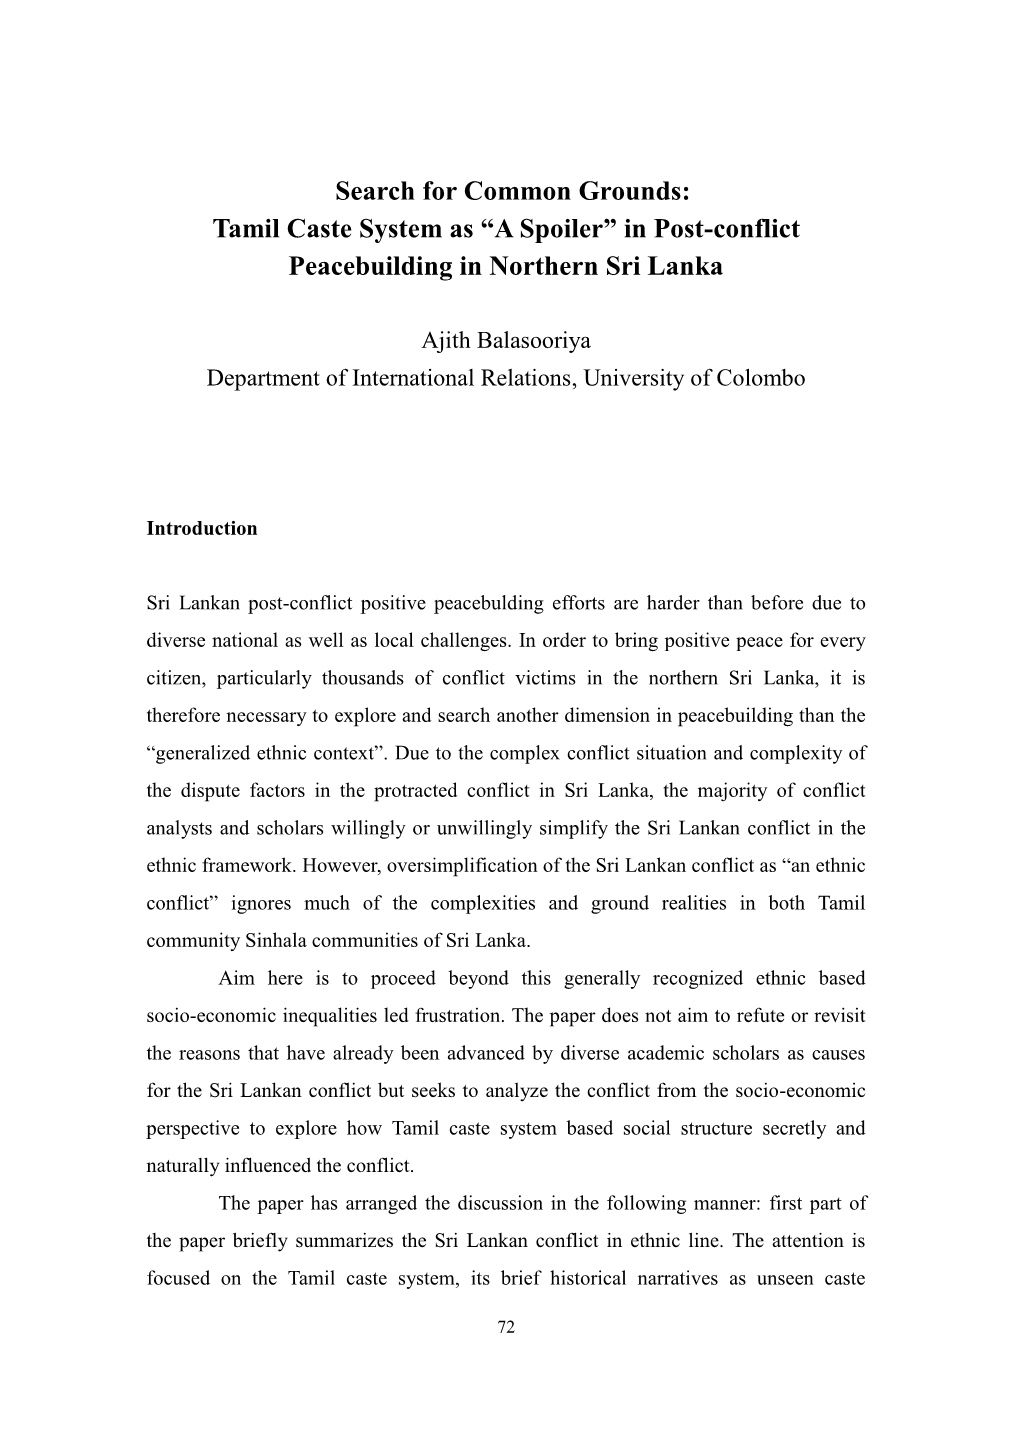 Search for Common Grounds: Tamil Caste System As “A Spoiler” in Post-Conflict Peacebuilding in Northern Sri Lanka